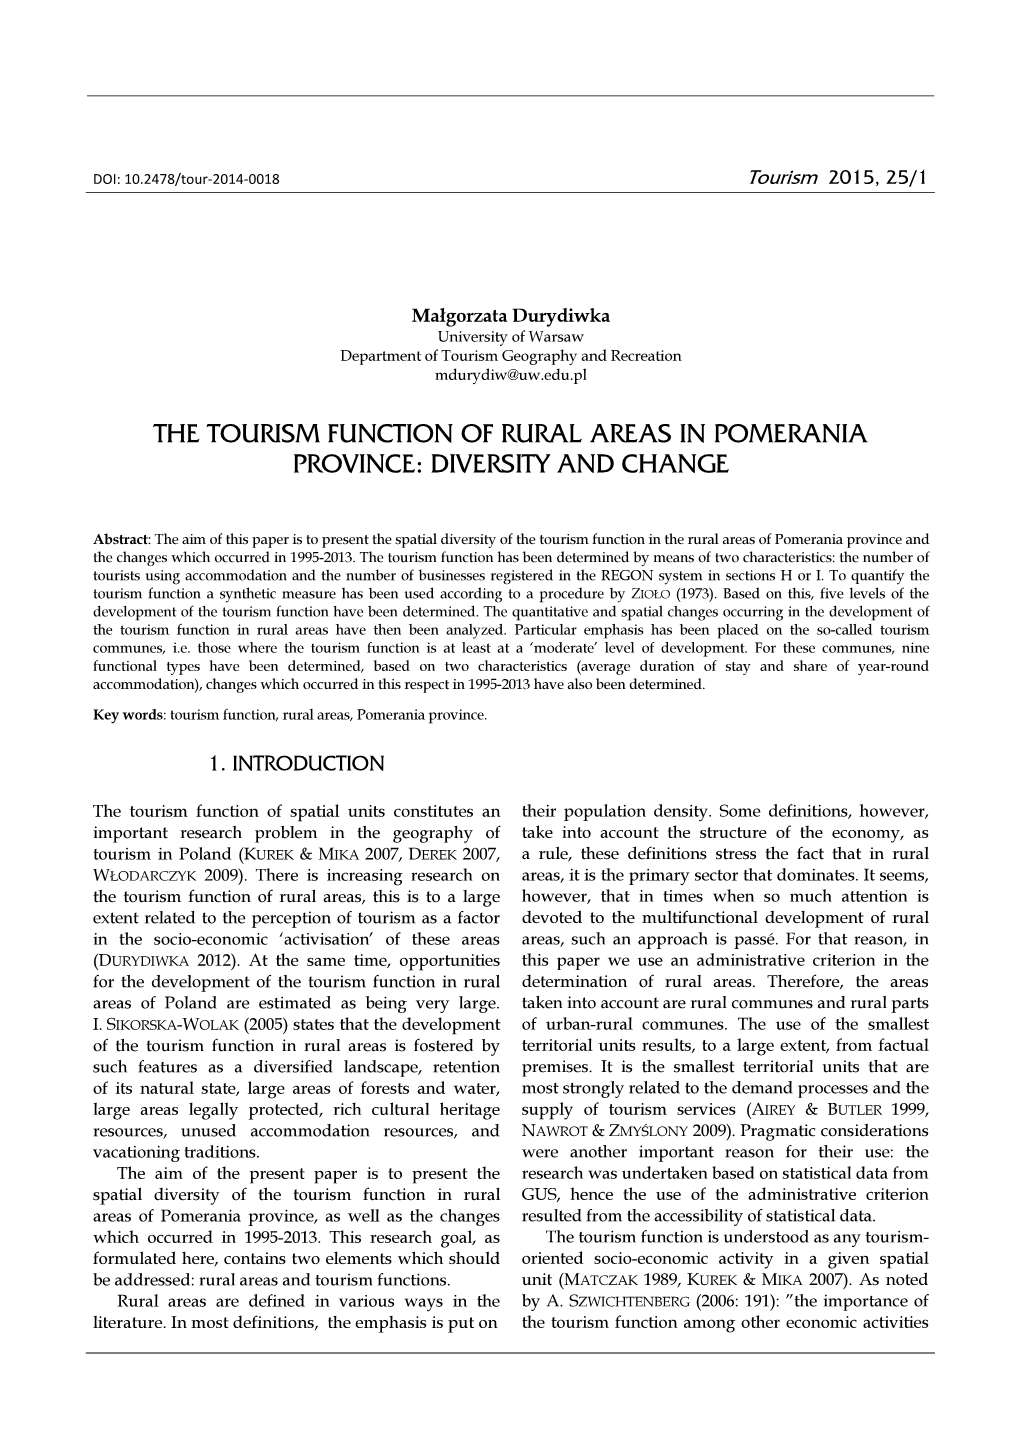 The Tourism Function of Rural Areas in Pomerania Province: Diversity and Change